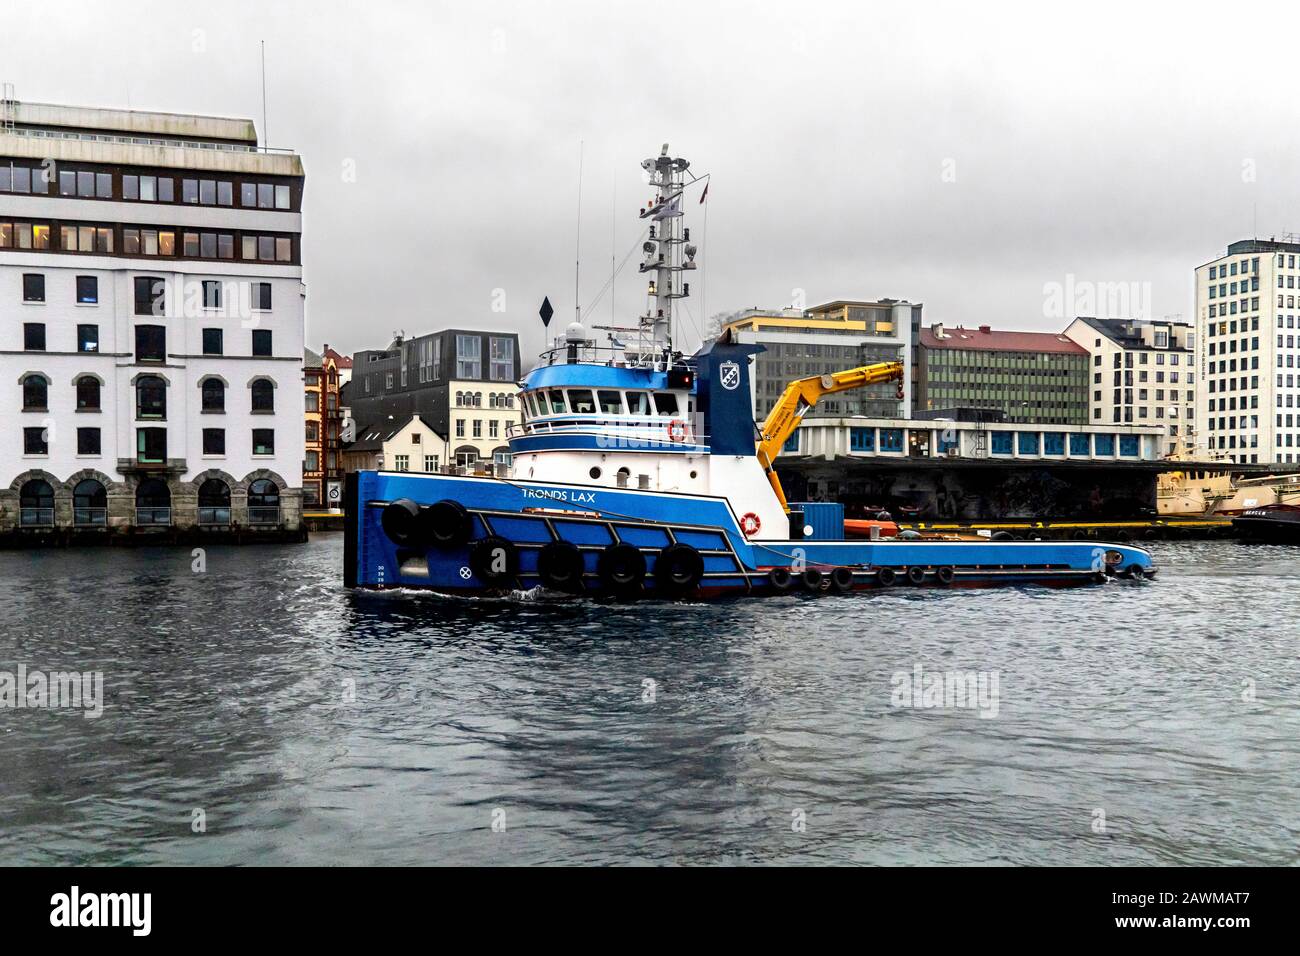 Tug boat Tronds Lax arriving in the port of Bergen, Norway. A dark, rainy and foggy winter day Stock Photo